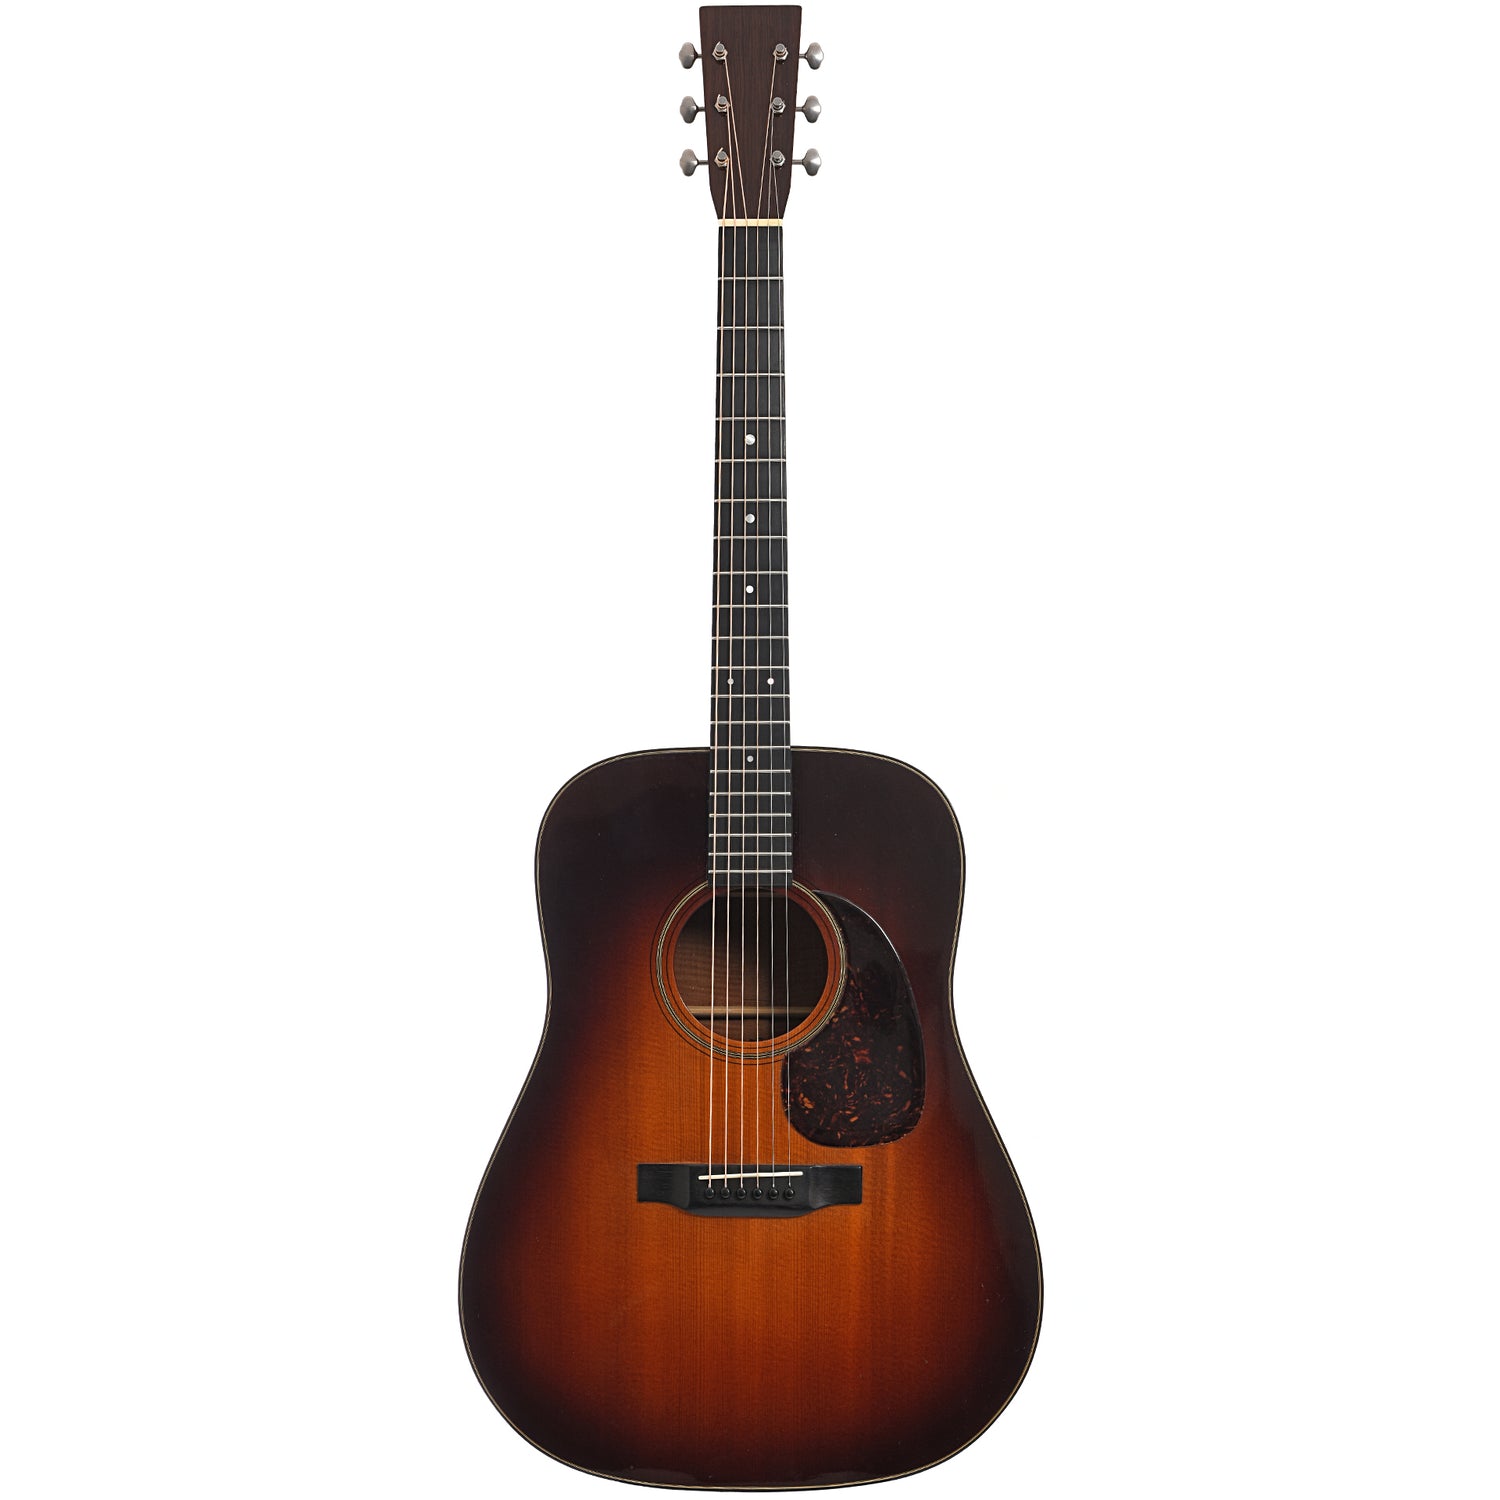 Full front of Konkoly KD-18A Acoustic